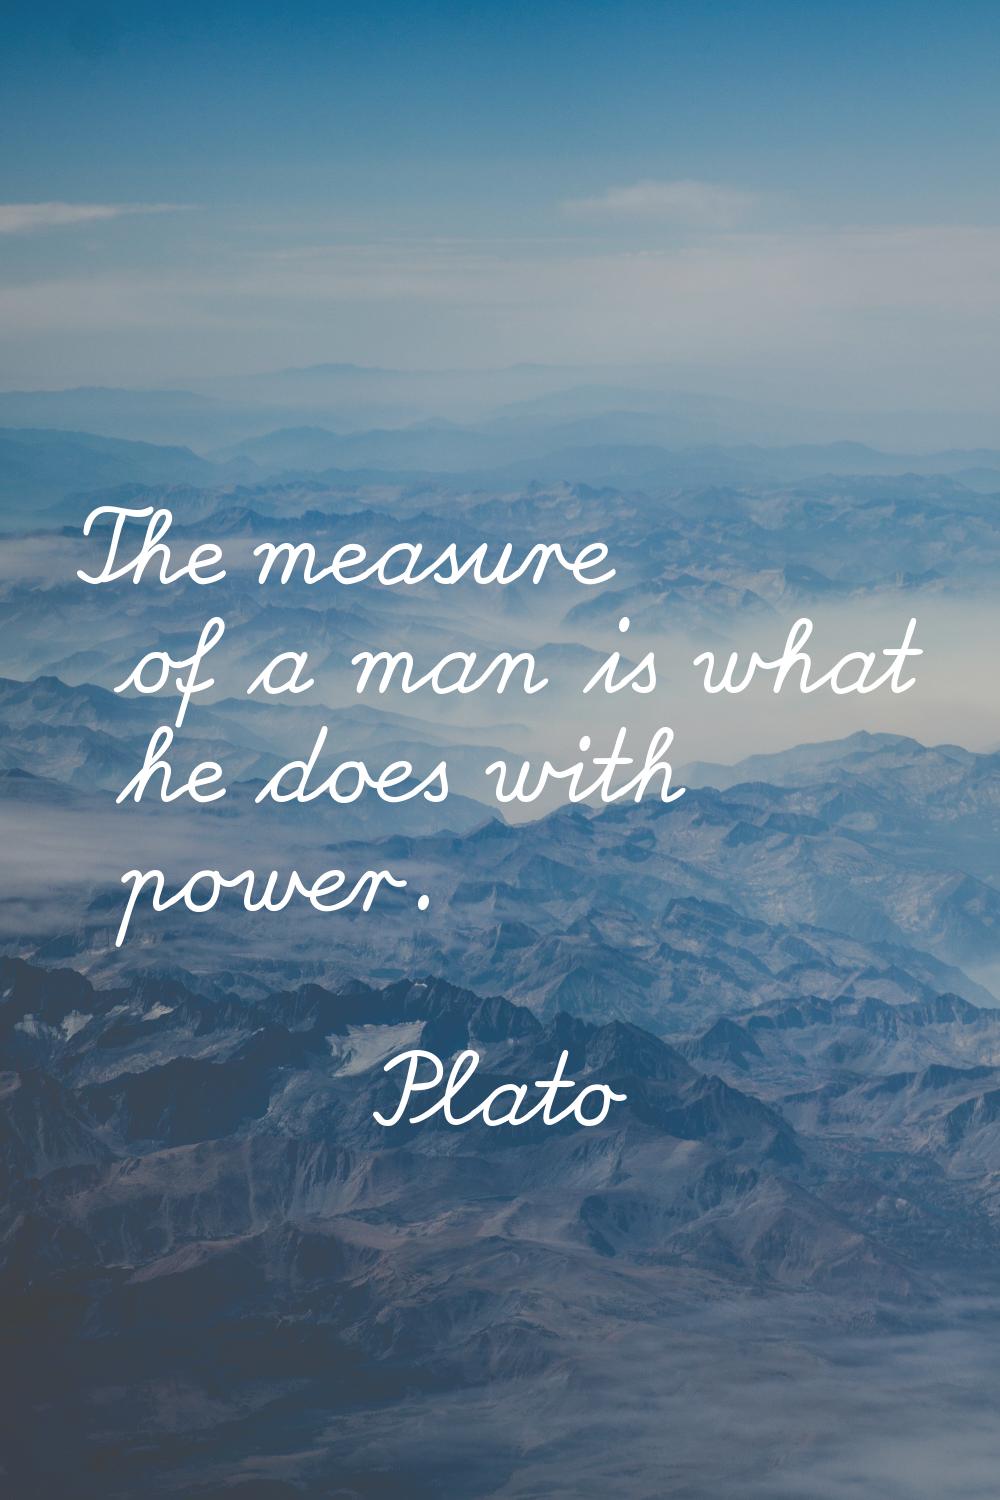 The measure of a man is what he does with power.